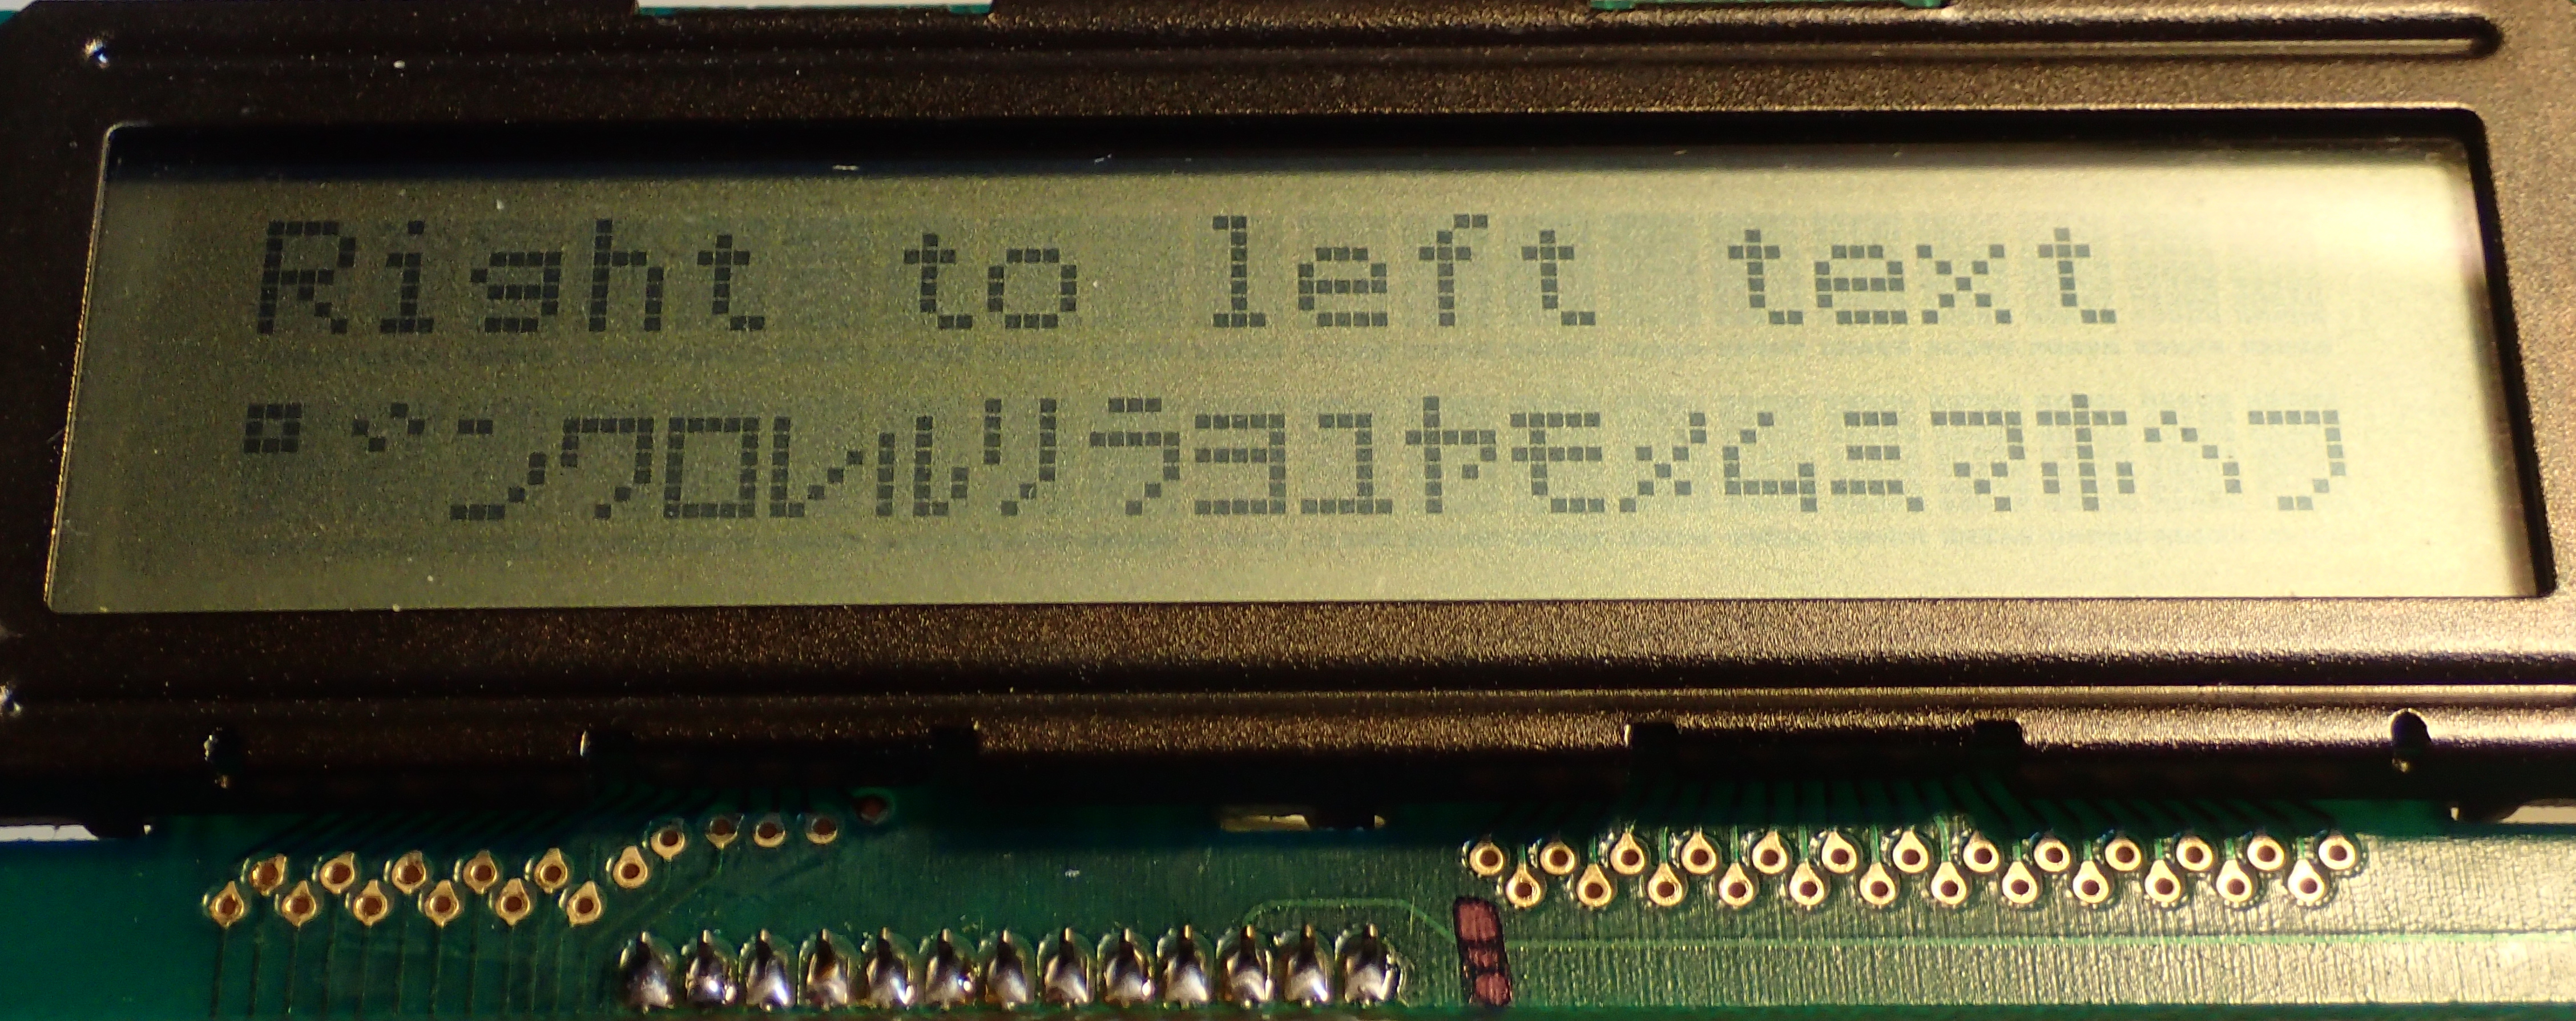 uPD7228 LCD displaying text